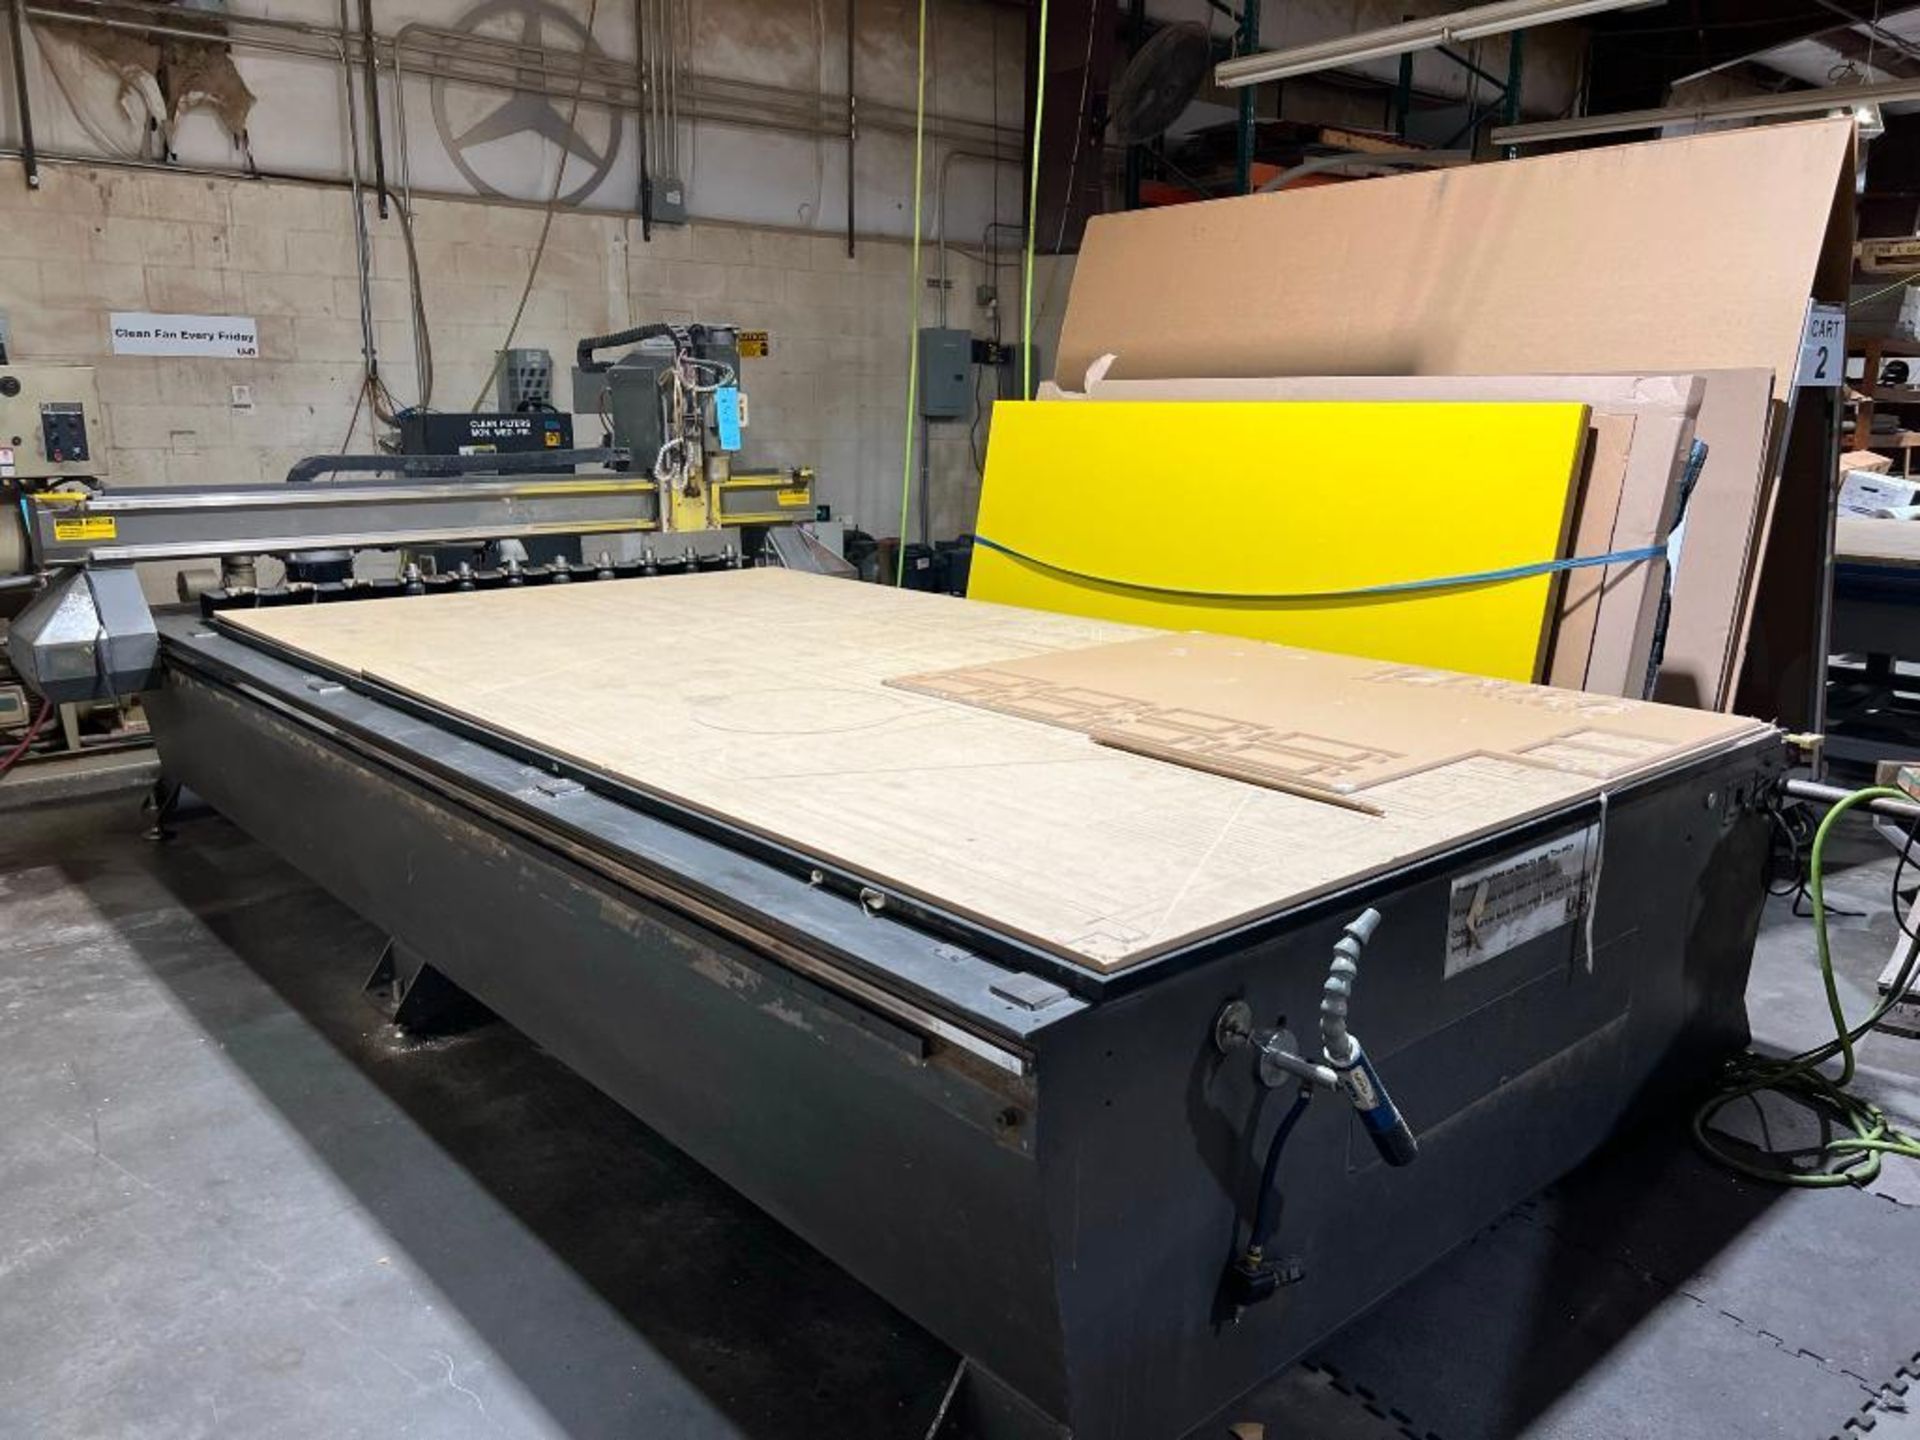 Multicam CNC Router Model 3305-R, S/N 3-305-R05361, 6' x 12' Table, with Tooling, Pendant Controls, - Image 2 of 16